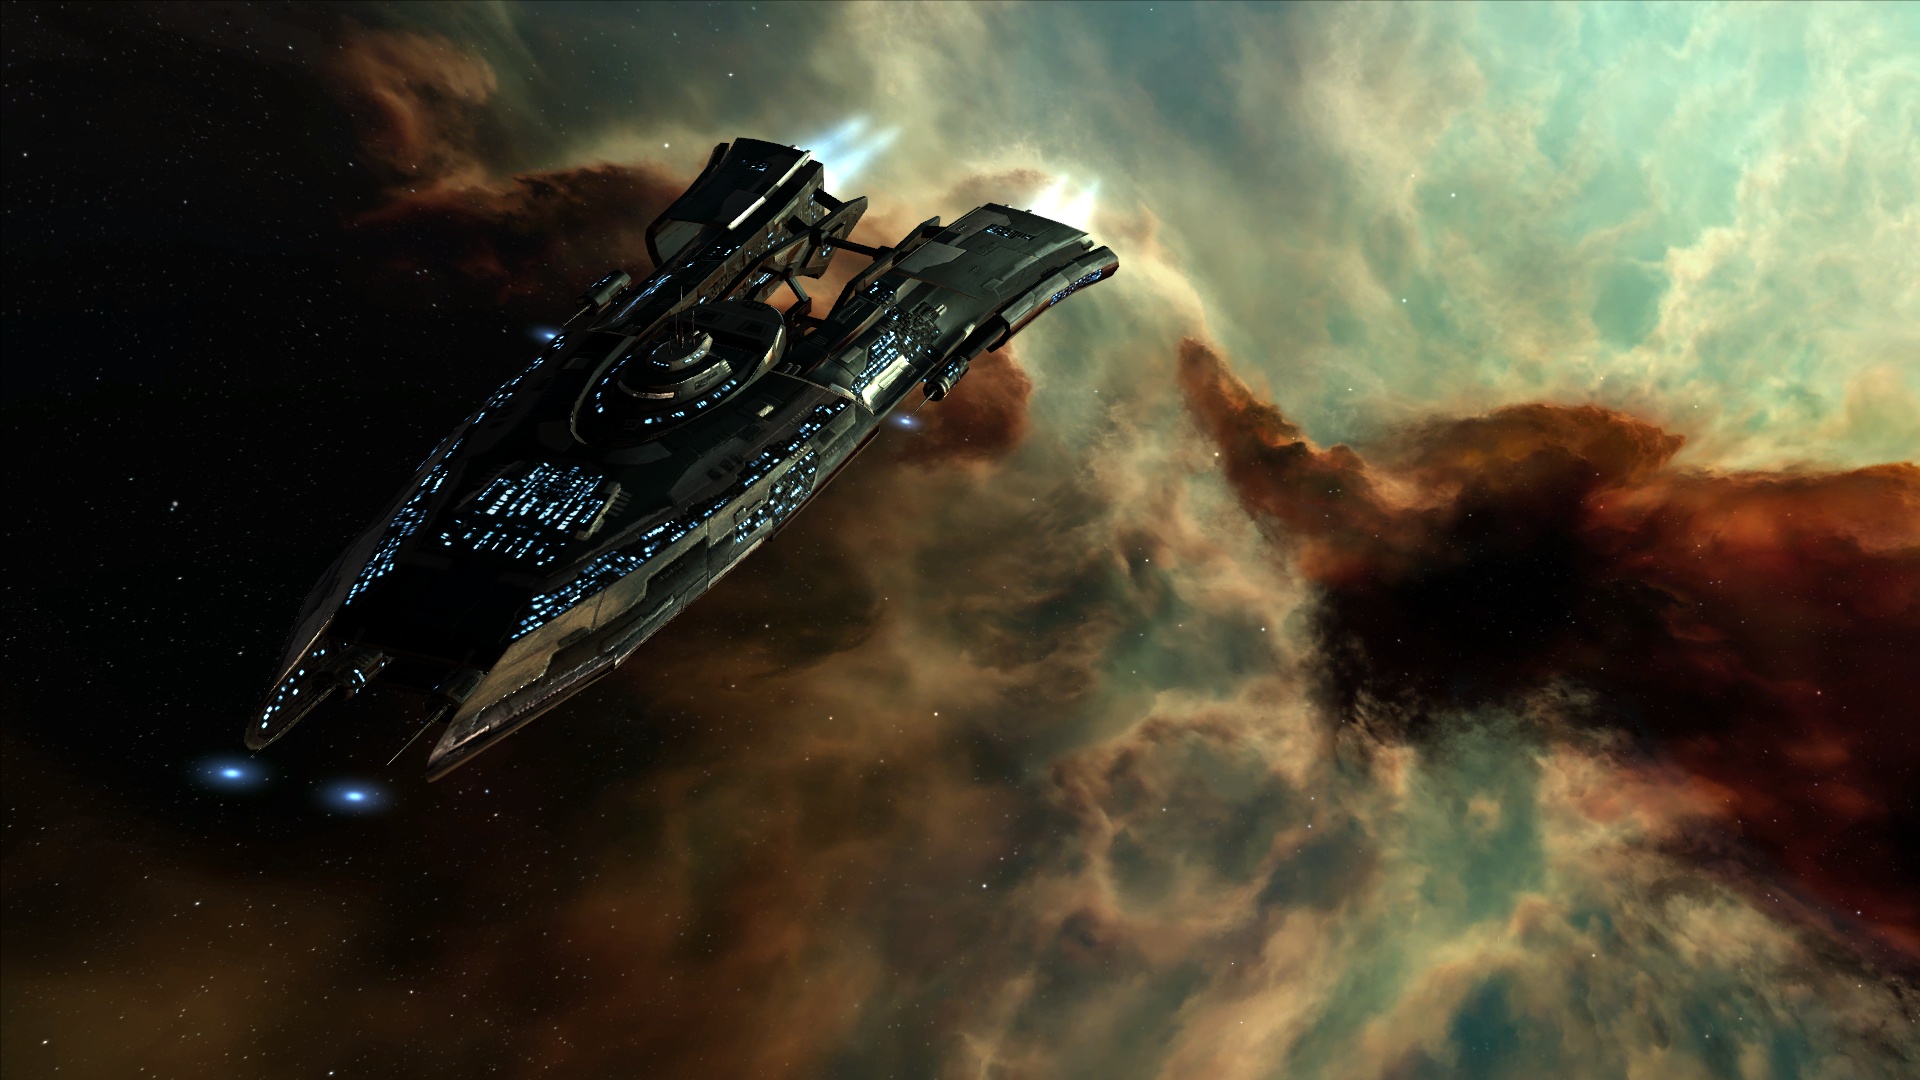 Spaceship Full HD Wallpaper and Background Image | 1920x1080 | ID:179725